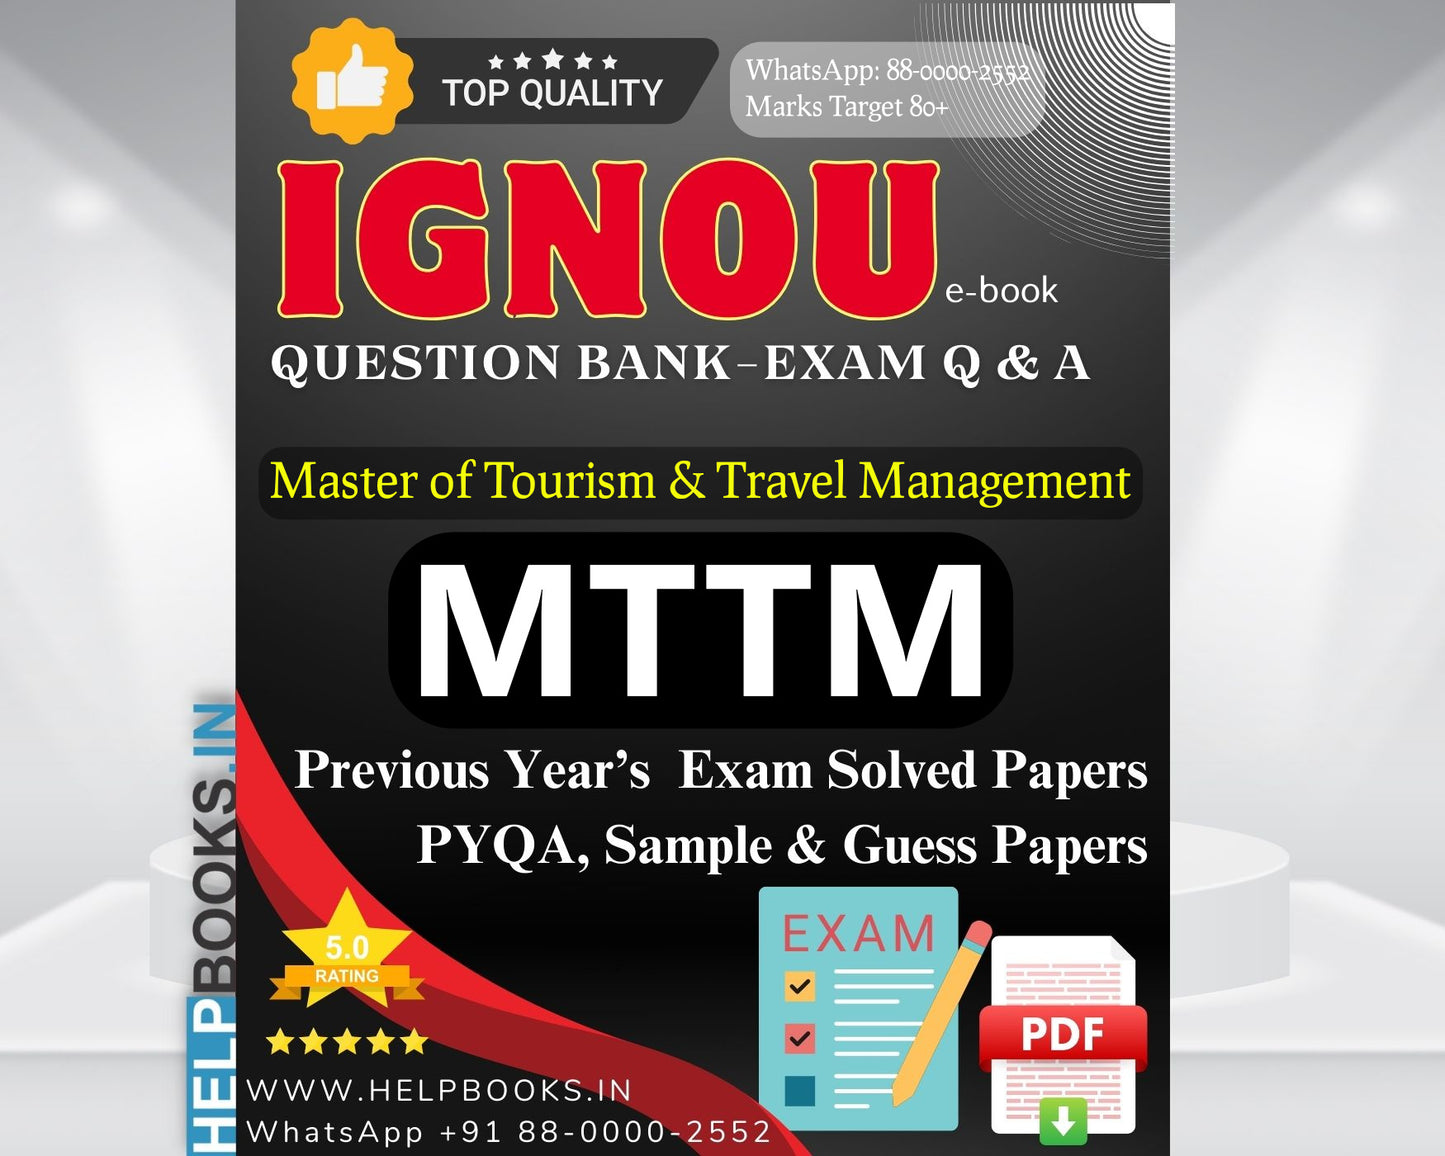 IGNOU MTTM Study Notes Combo for Exam: Previous Years Solved Papers, Sample Guess Papers